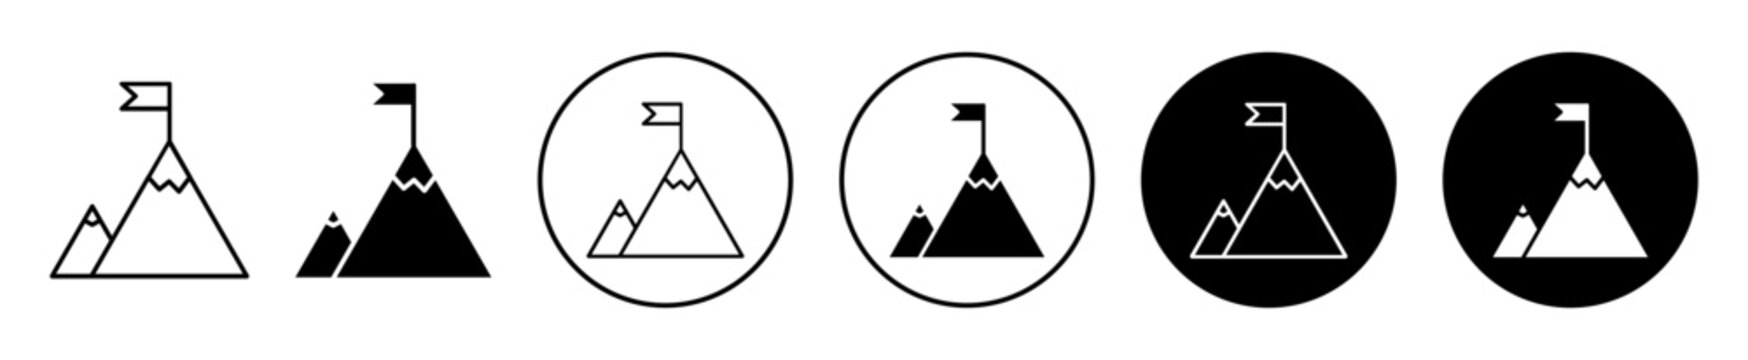 Leadership icon set. mission mountain with flag vector symbol. business challenge or goal sign in black filled and outlined style.